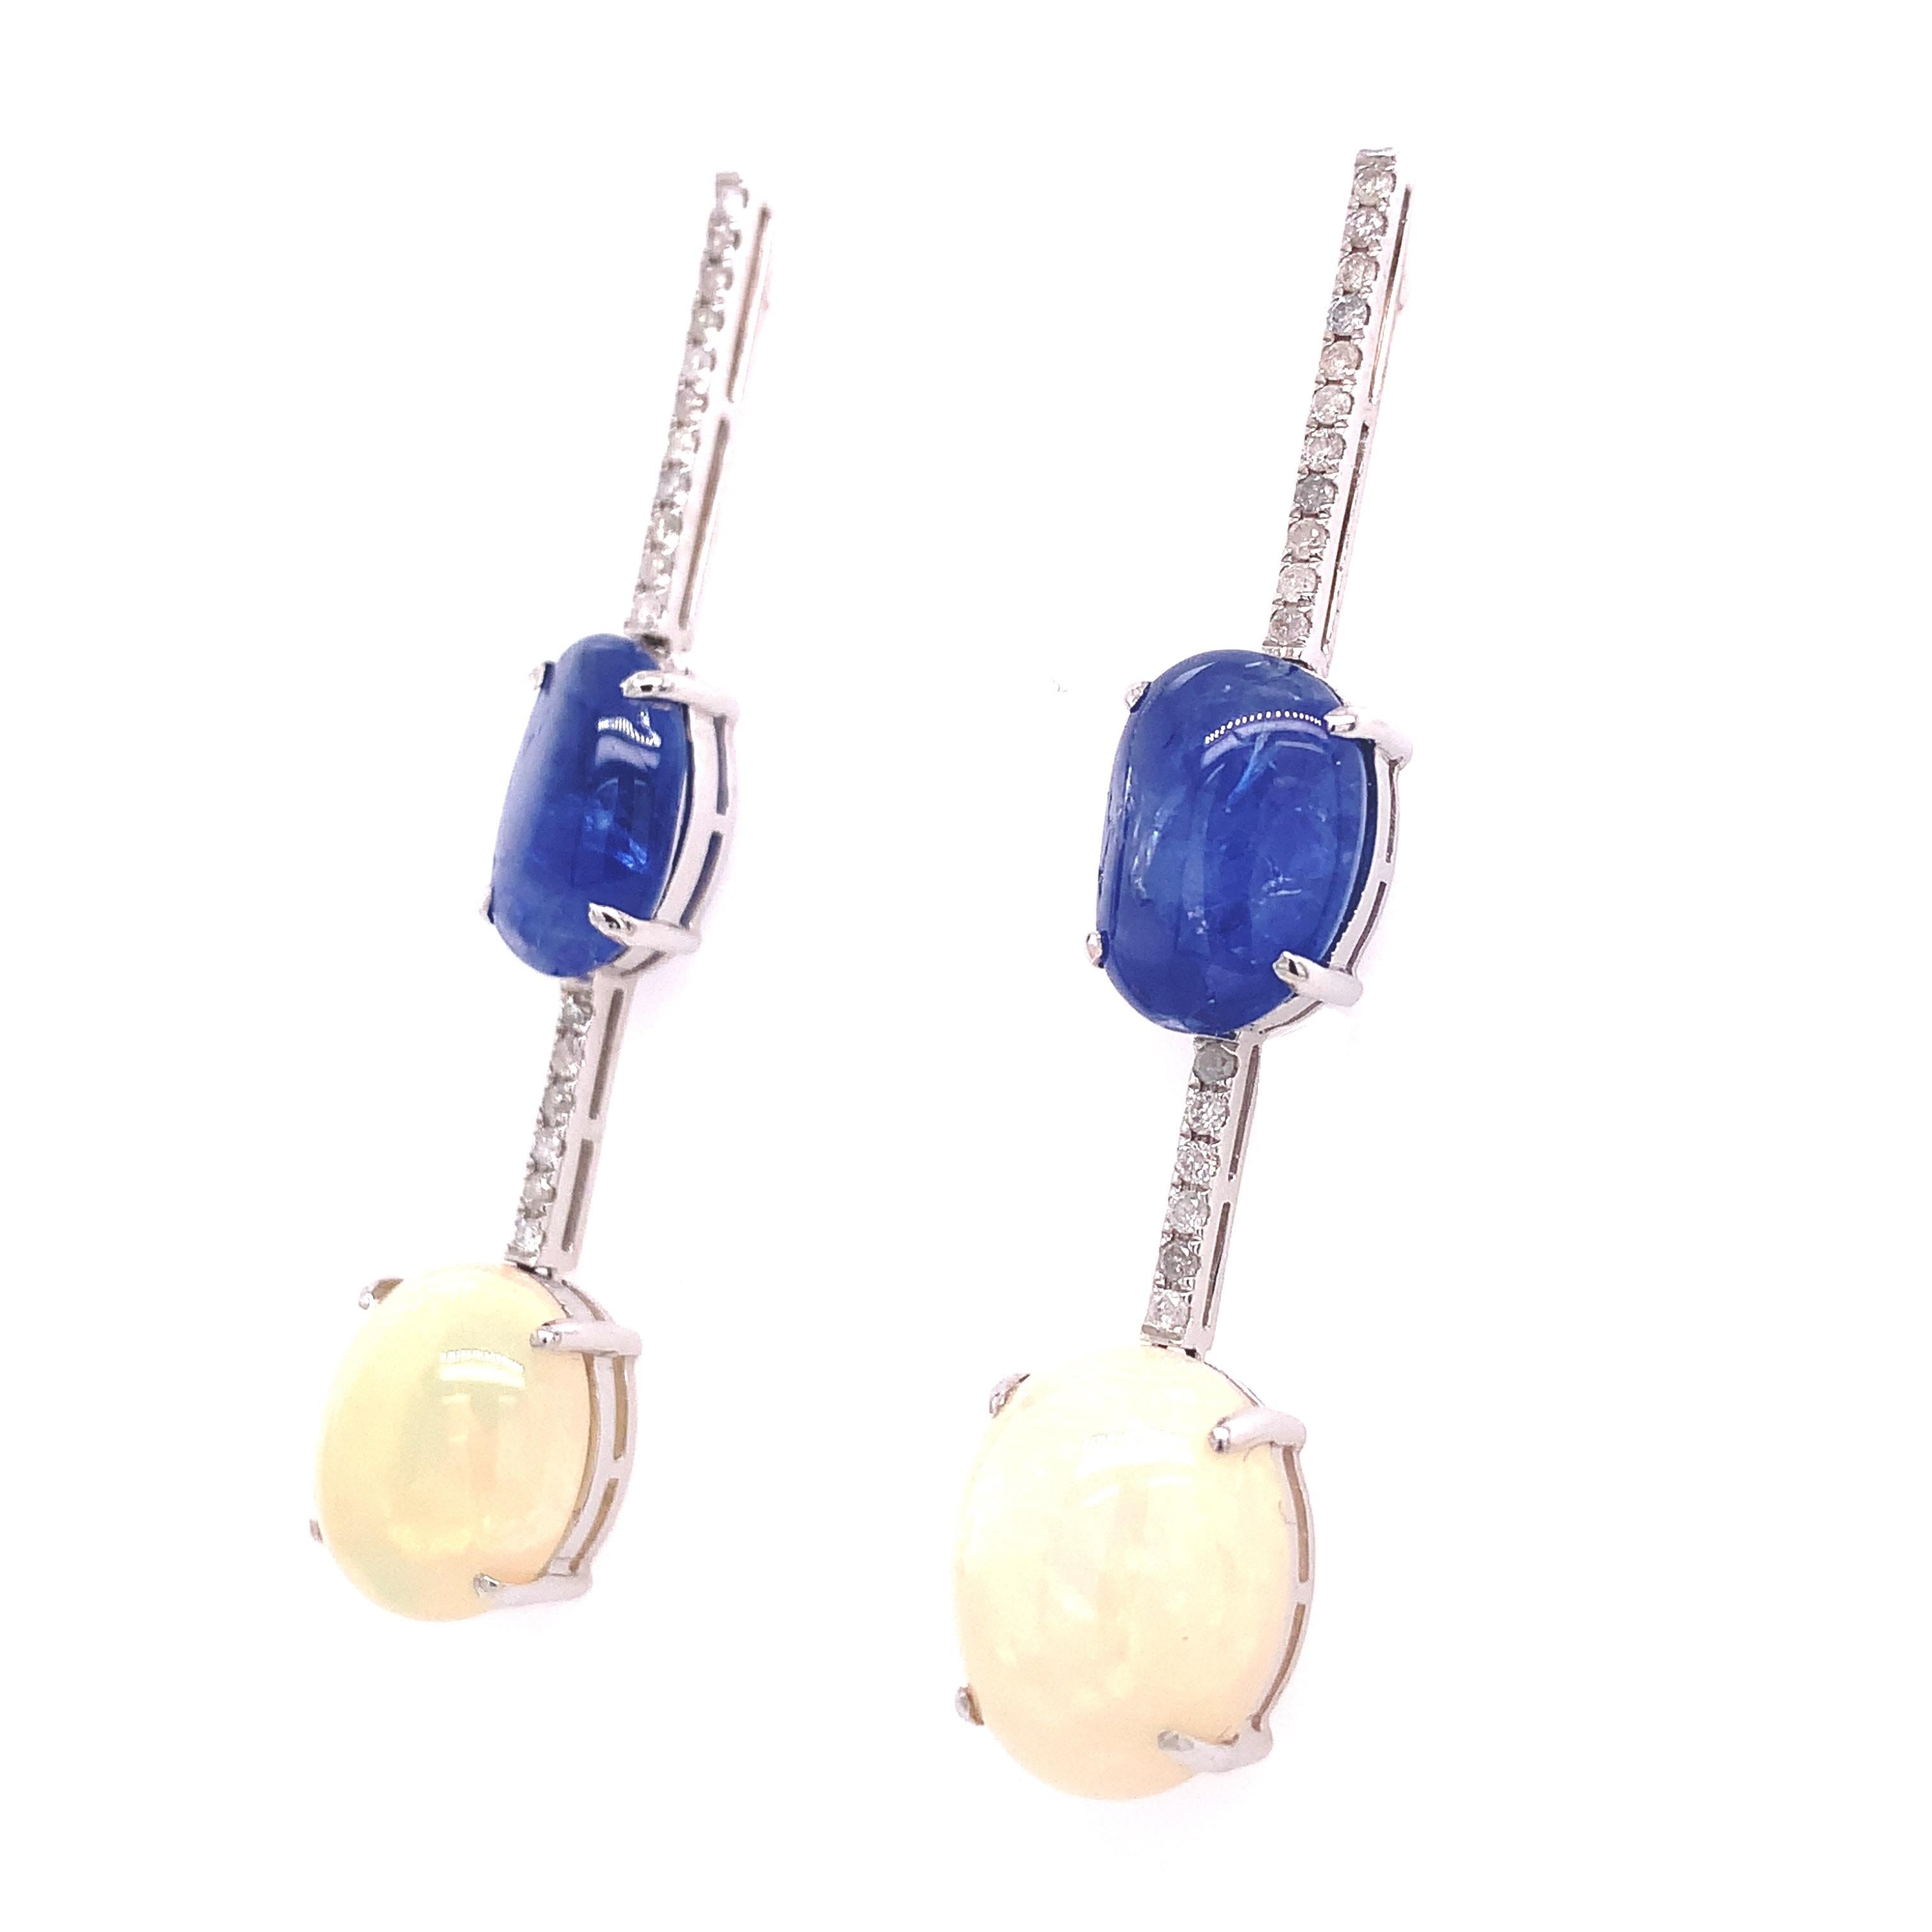 With a 9.75 carat Blue Sapphire and 7.73 carat Opal beating at the heart, these exquisite linear earrings extend into a sparkling row of diamonds to create a combined effect of brilliance and relief